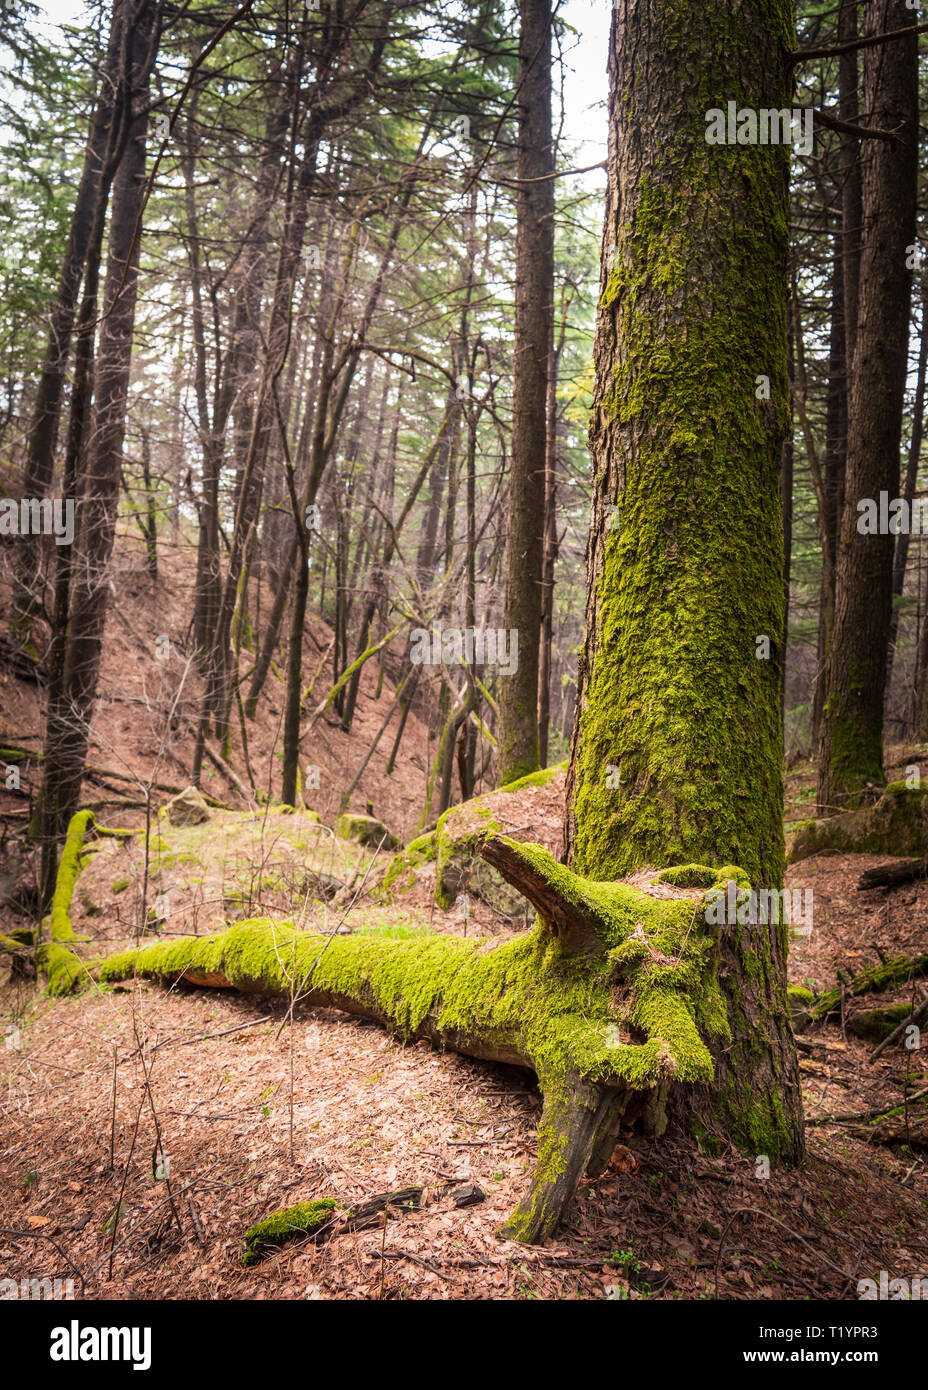 A tree fallen on the floor of a woodland. Green moss growing on tree stumps. Stock Photo